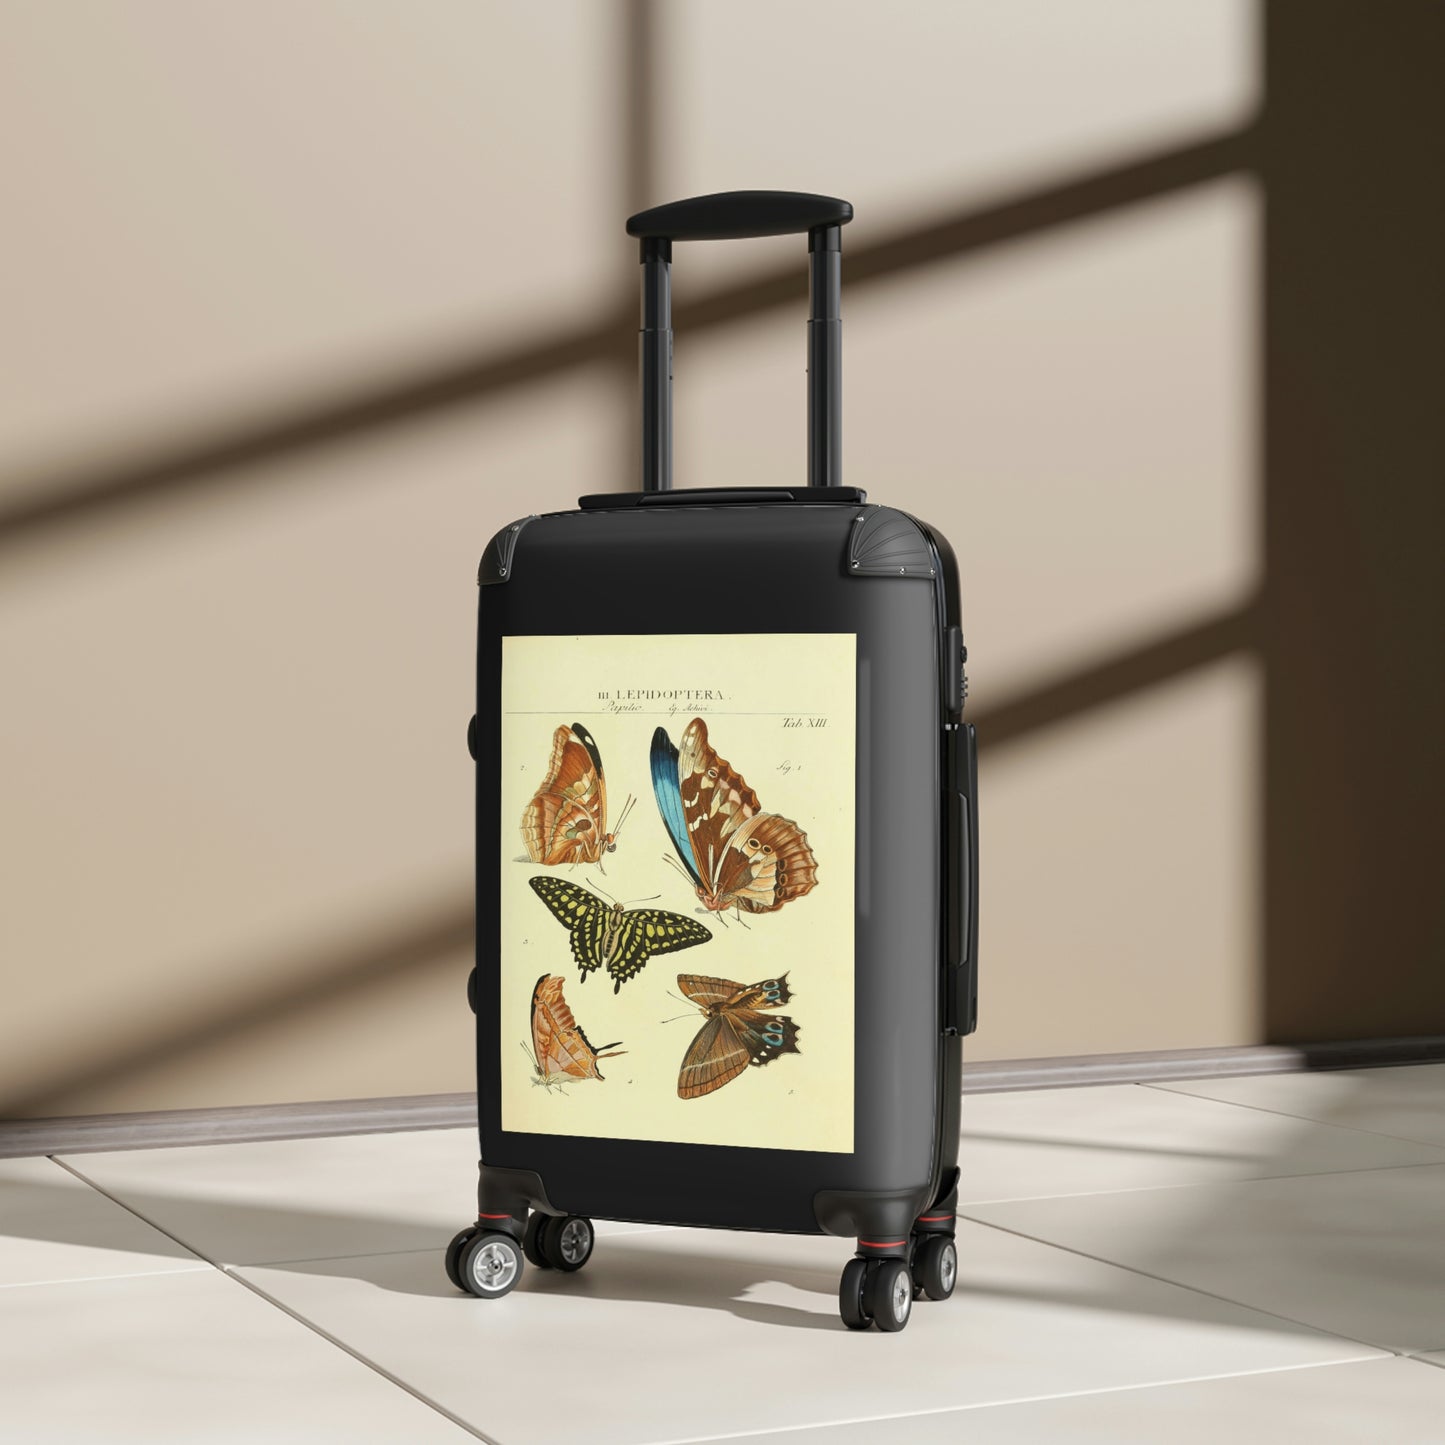 Getrott Butterflies Macrolepidopteran Rhopalocera Lepidoptera Papilic Achivi Cabin Suitcase Rolling Luggage Inner Pockets Extended Storage Adjustable Telescopic Handle Inner Pockets Double wheeled Polycarbonate Hard-shell Built-in Lock